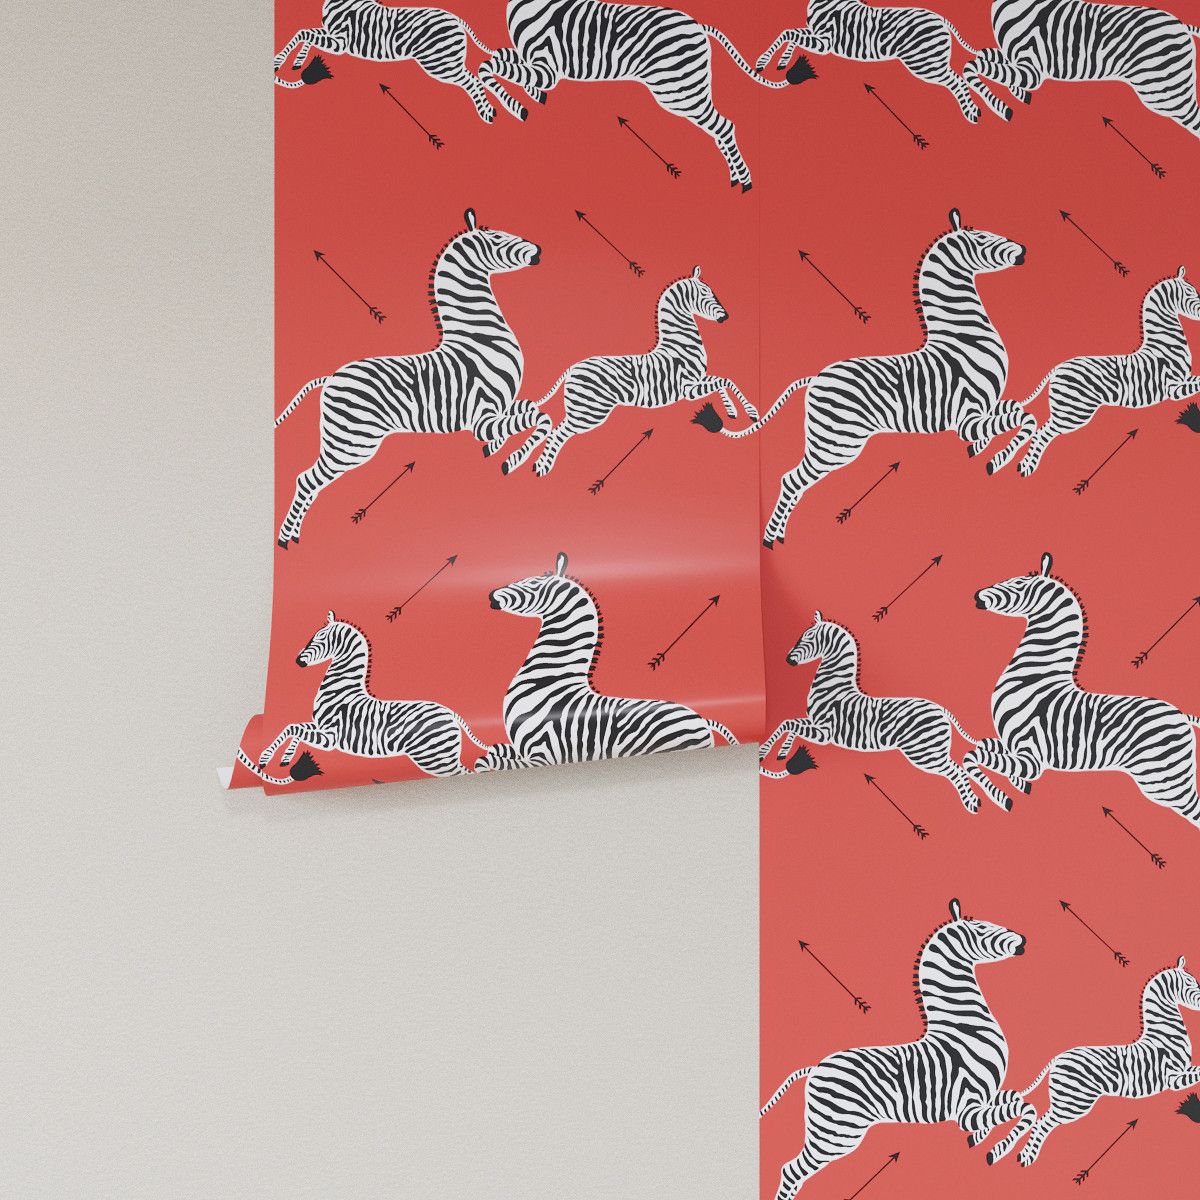 Peel-and-Stick Scalamandré Zebra-Print Wallpaper Can Now Be Yours